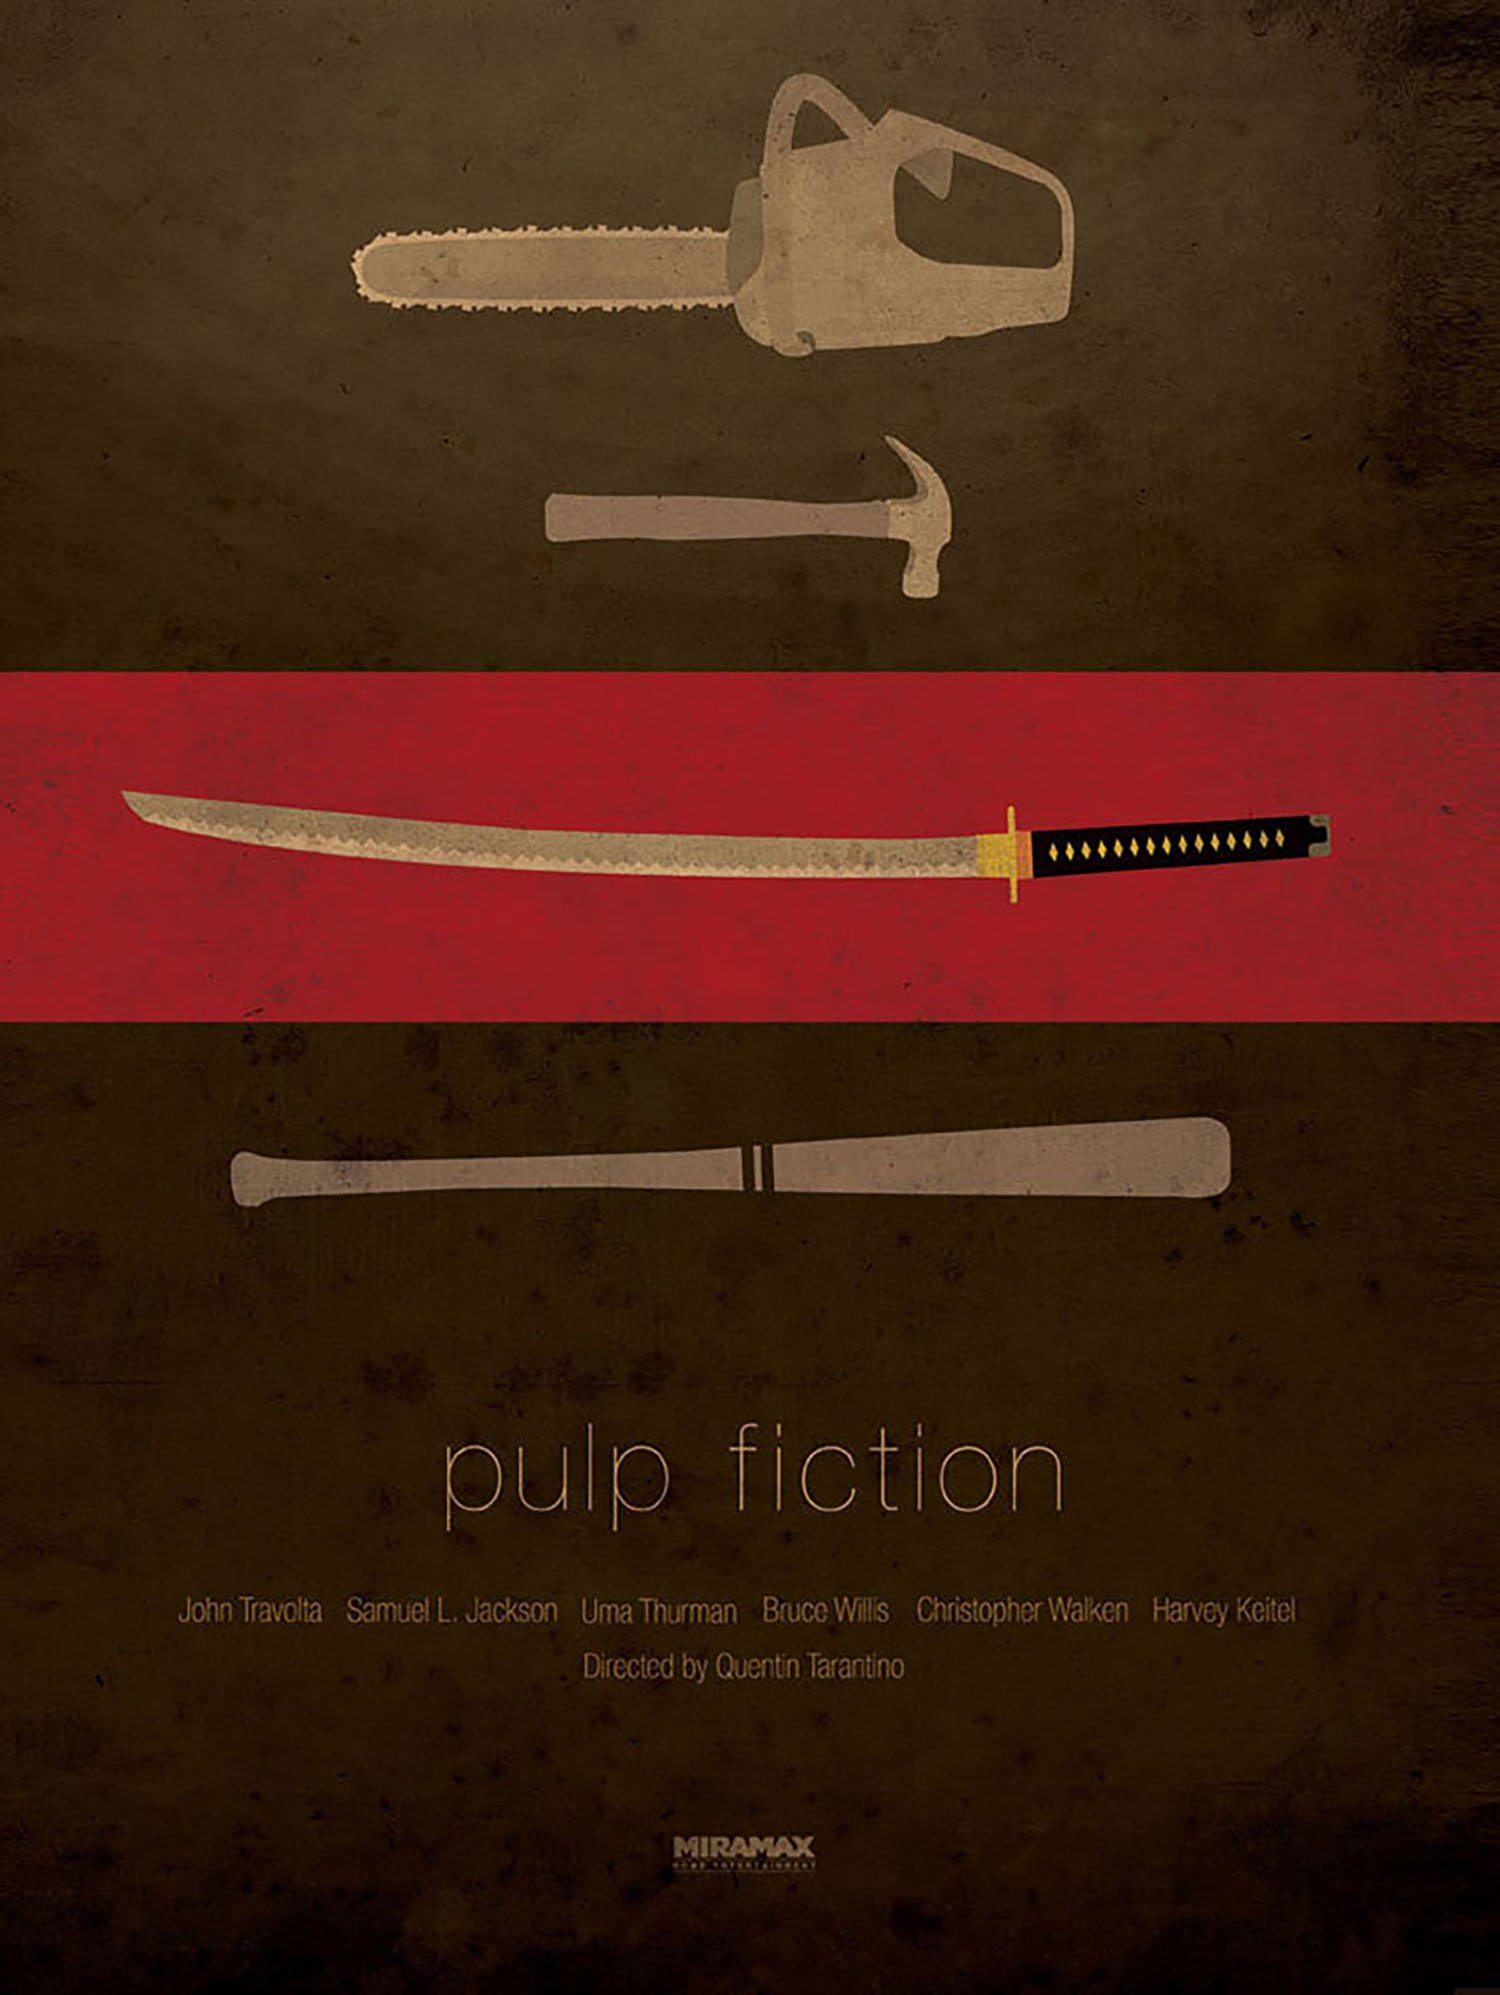 Fan made movie poster for Pulp Fiction by Ibraheem Youssef.